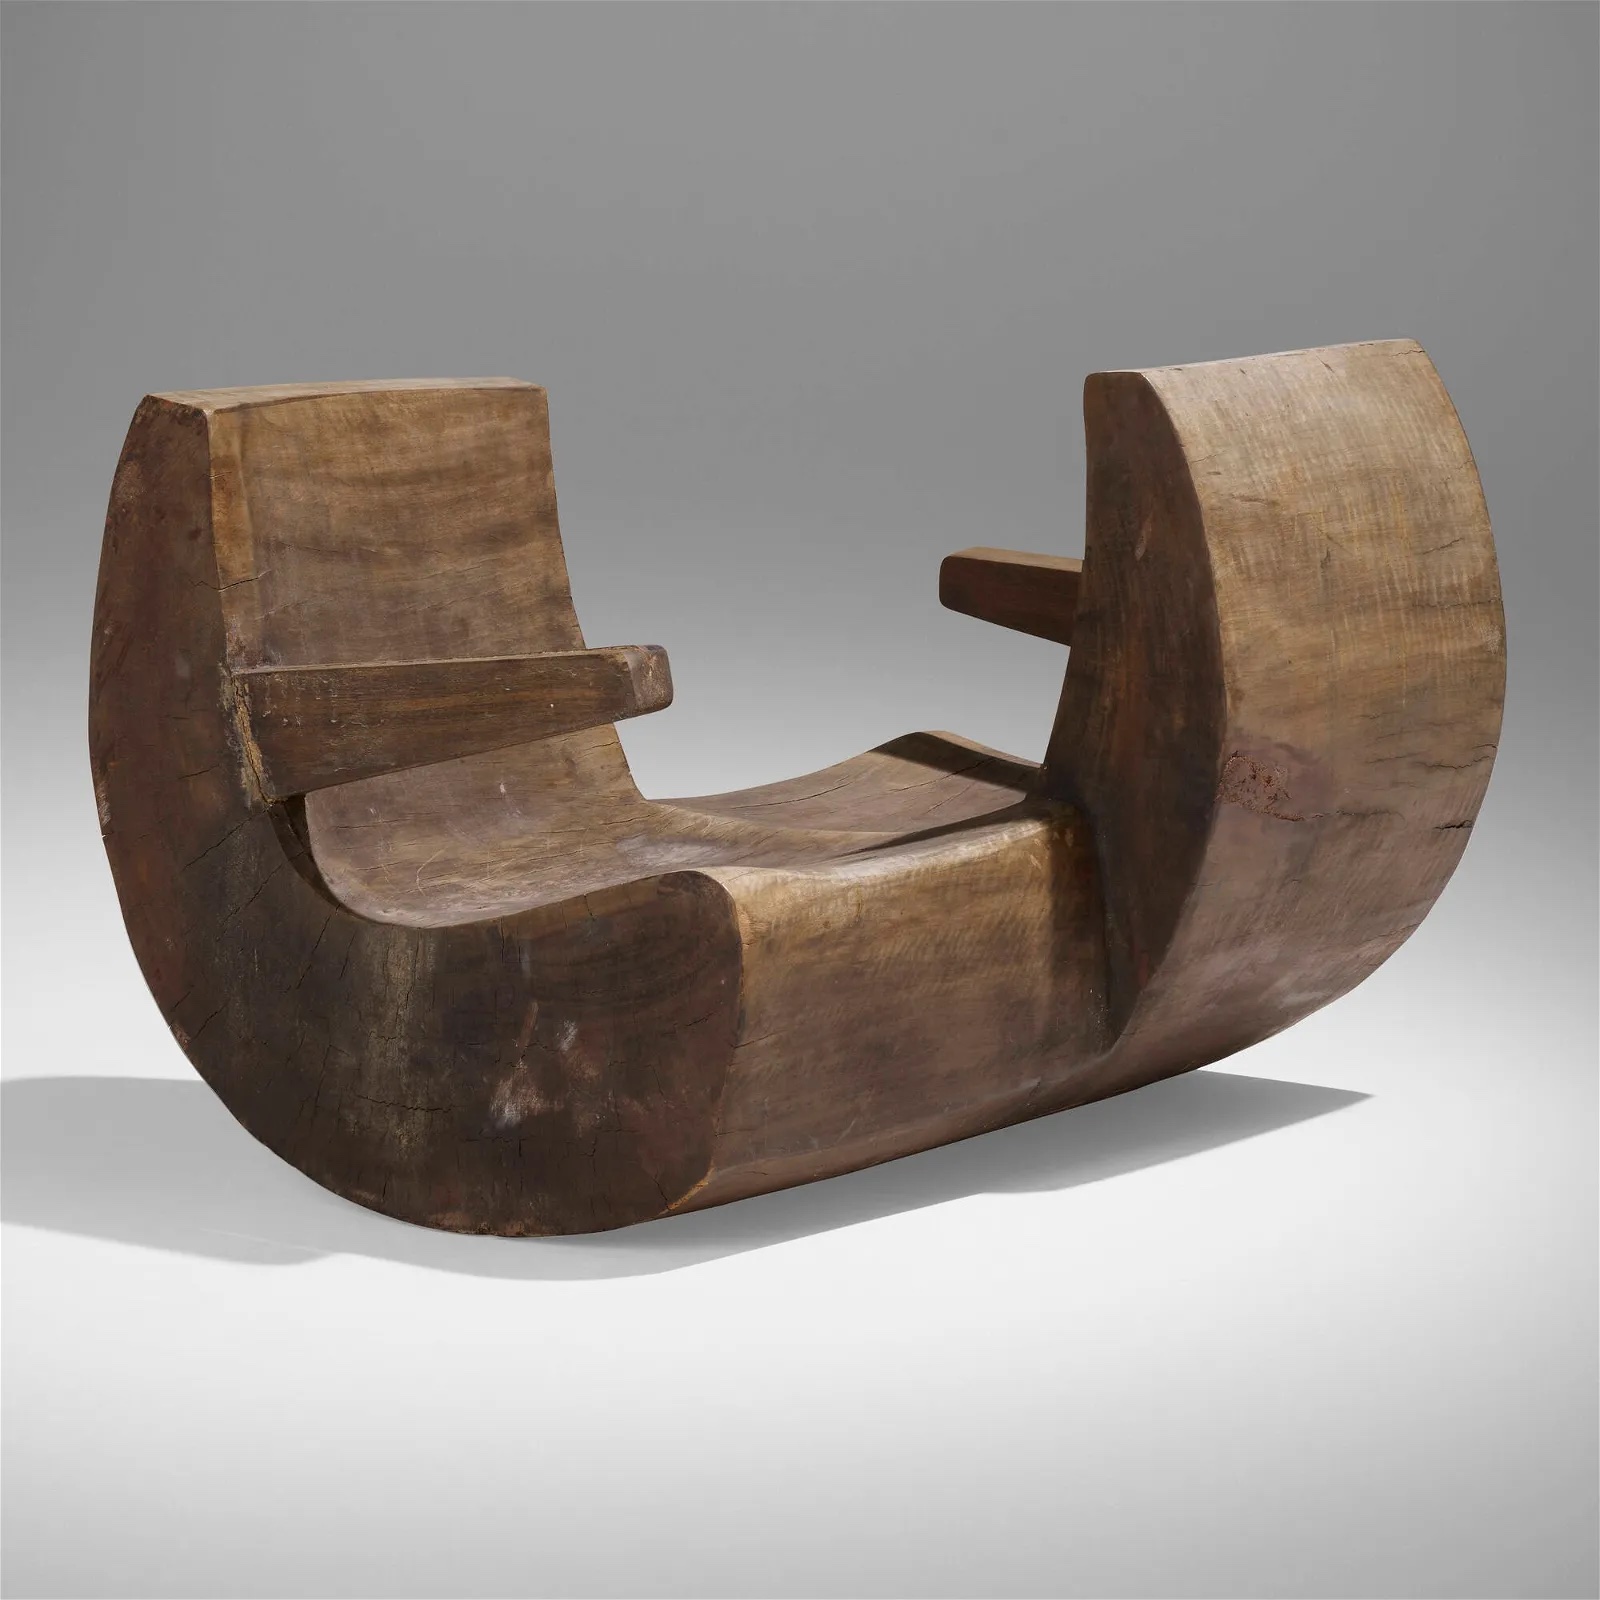 ‘Protest furniture’ by Brazilian Jose Zanine Caldas featured at Wright March 28